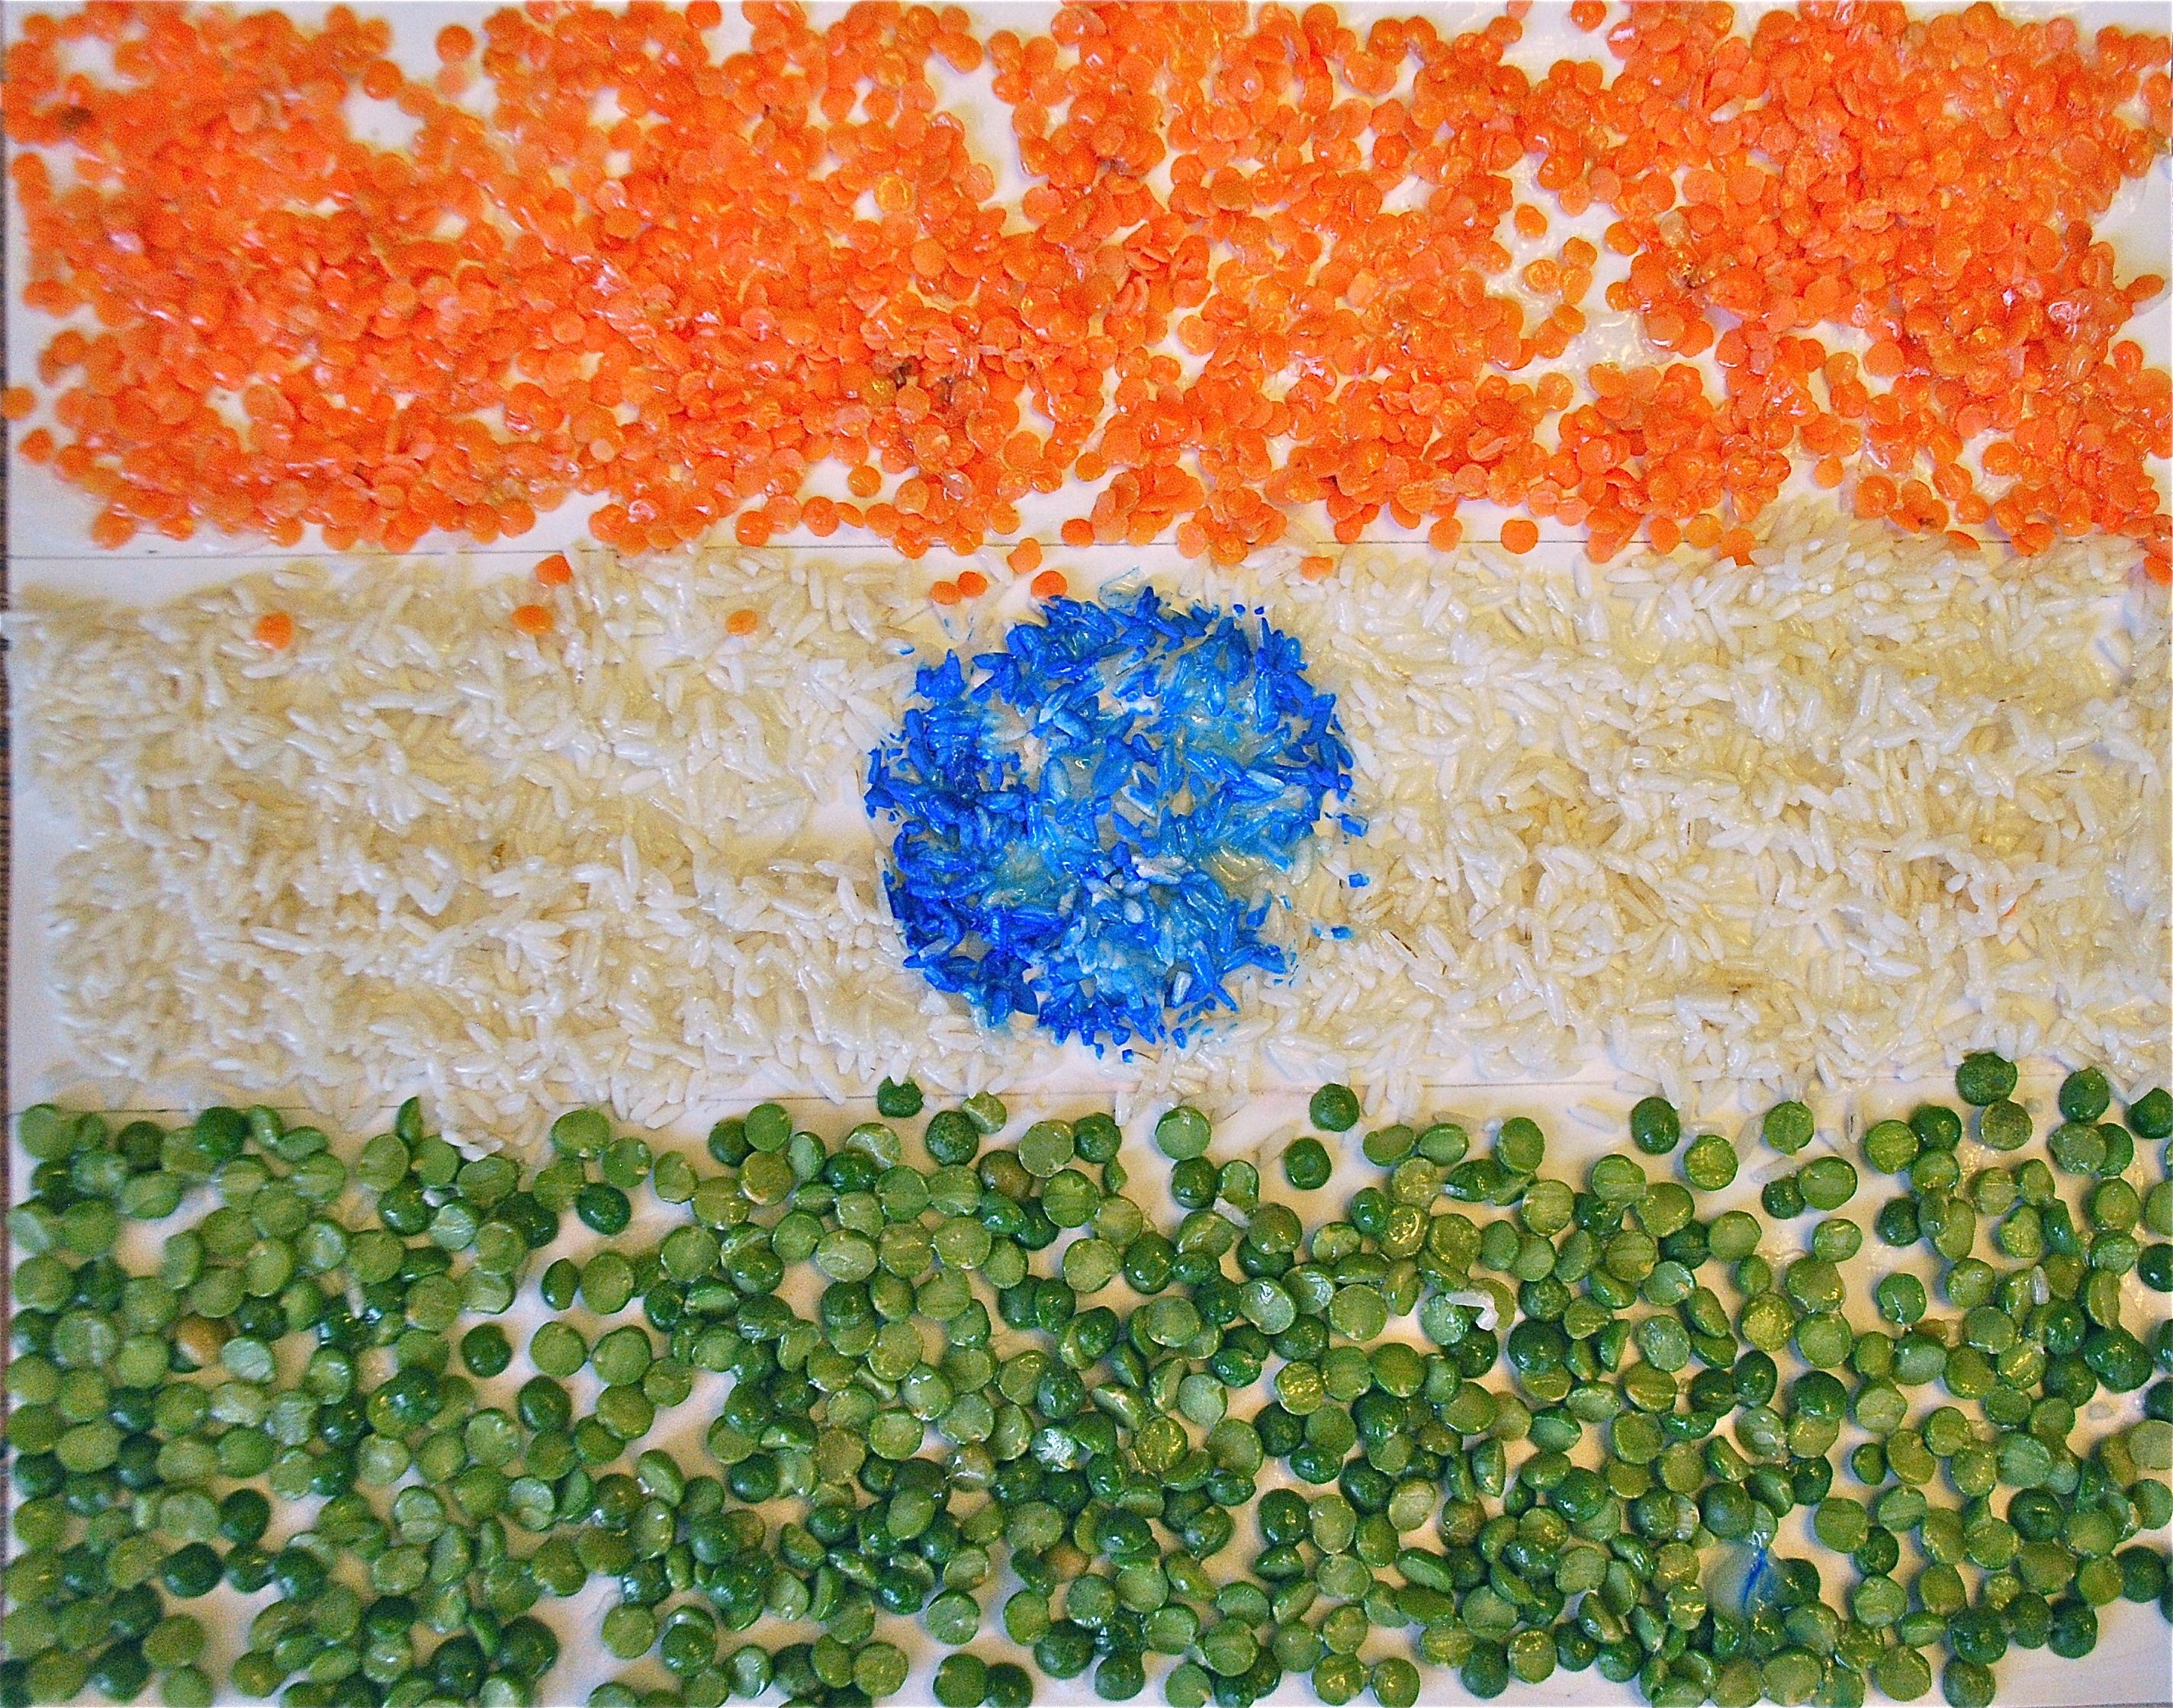 Indian Flag Photo In Pulses